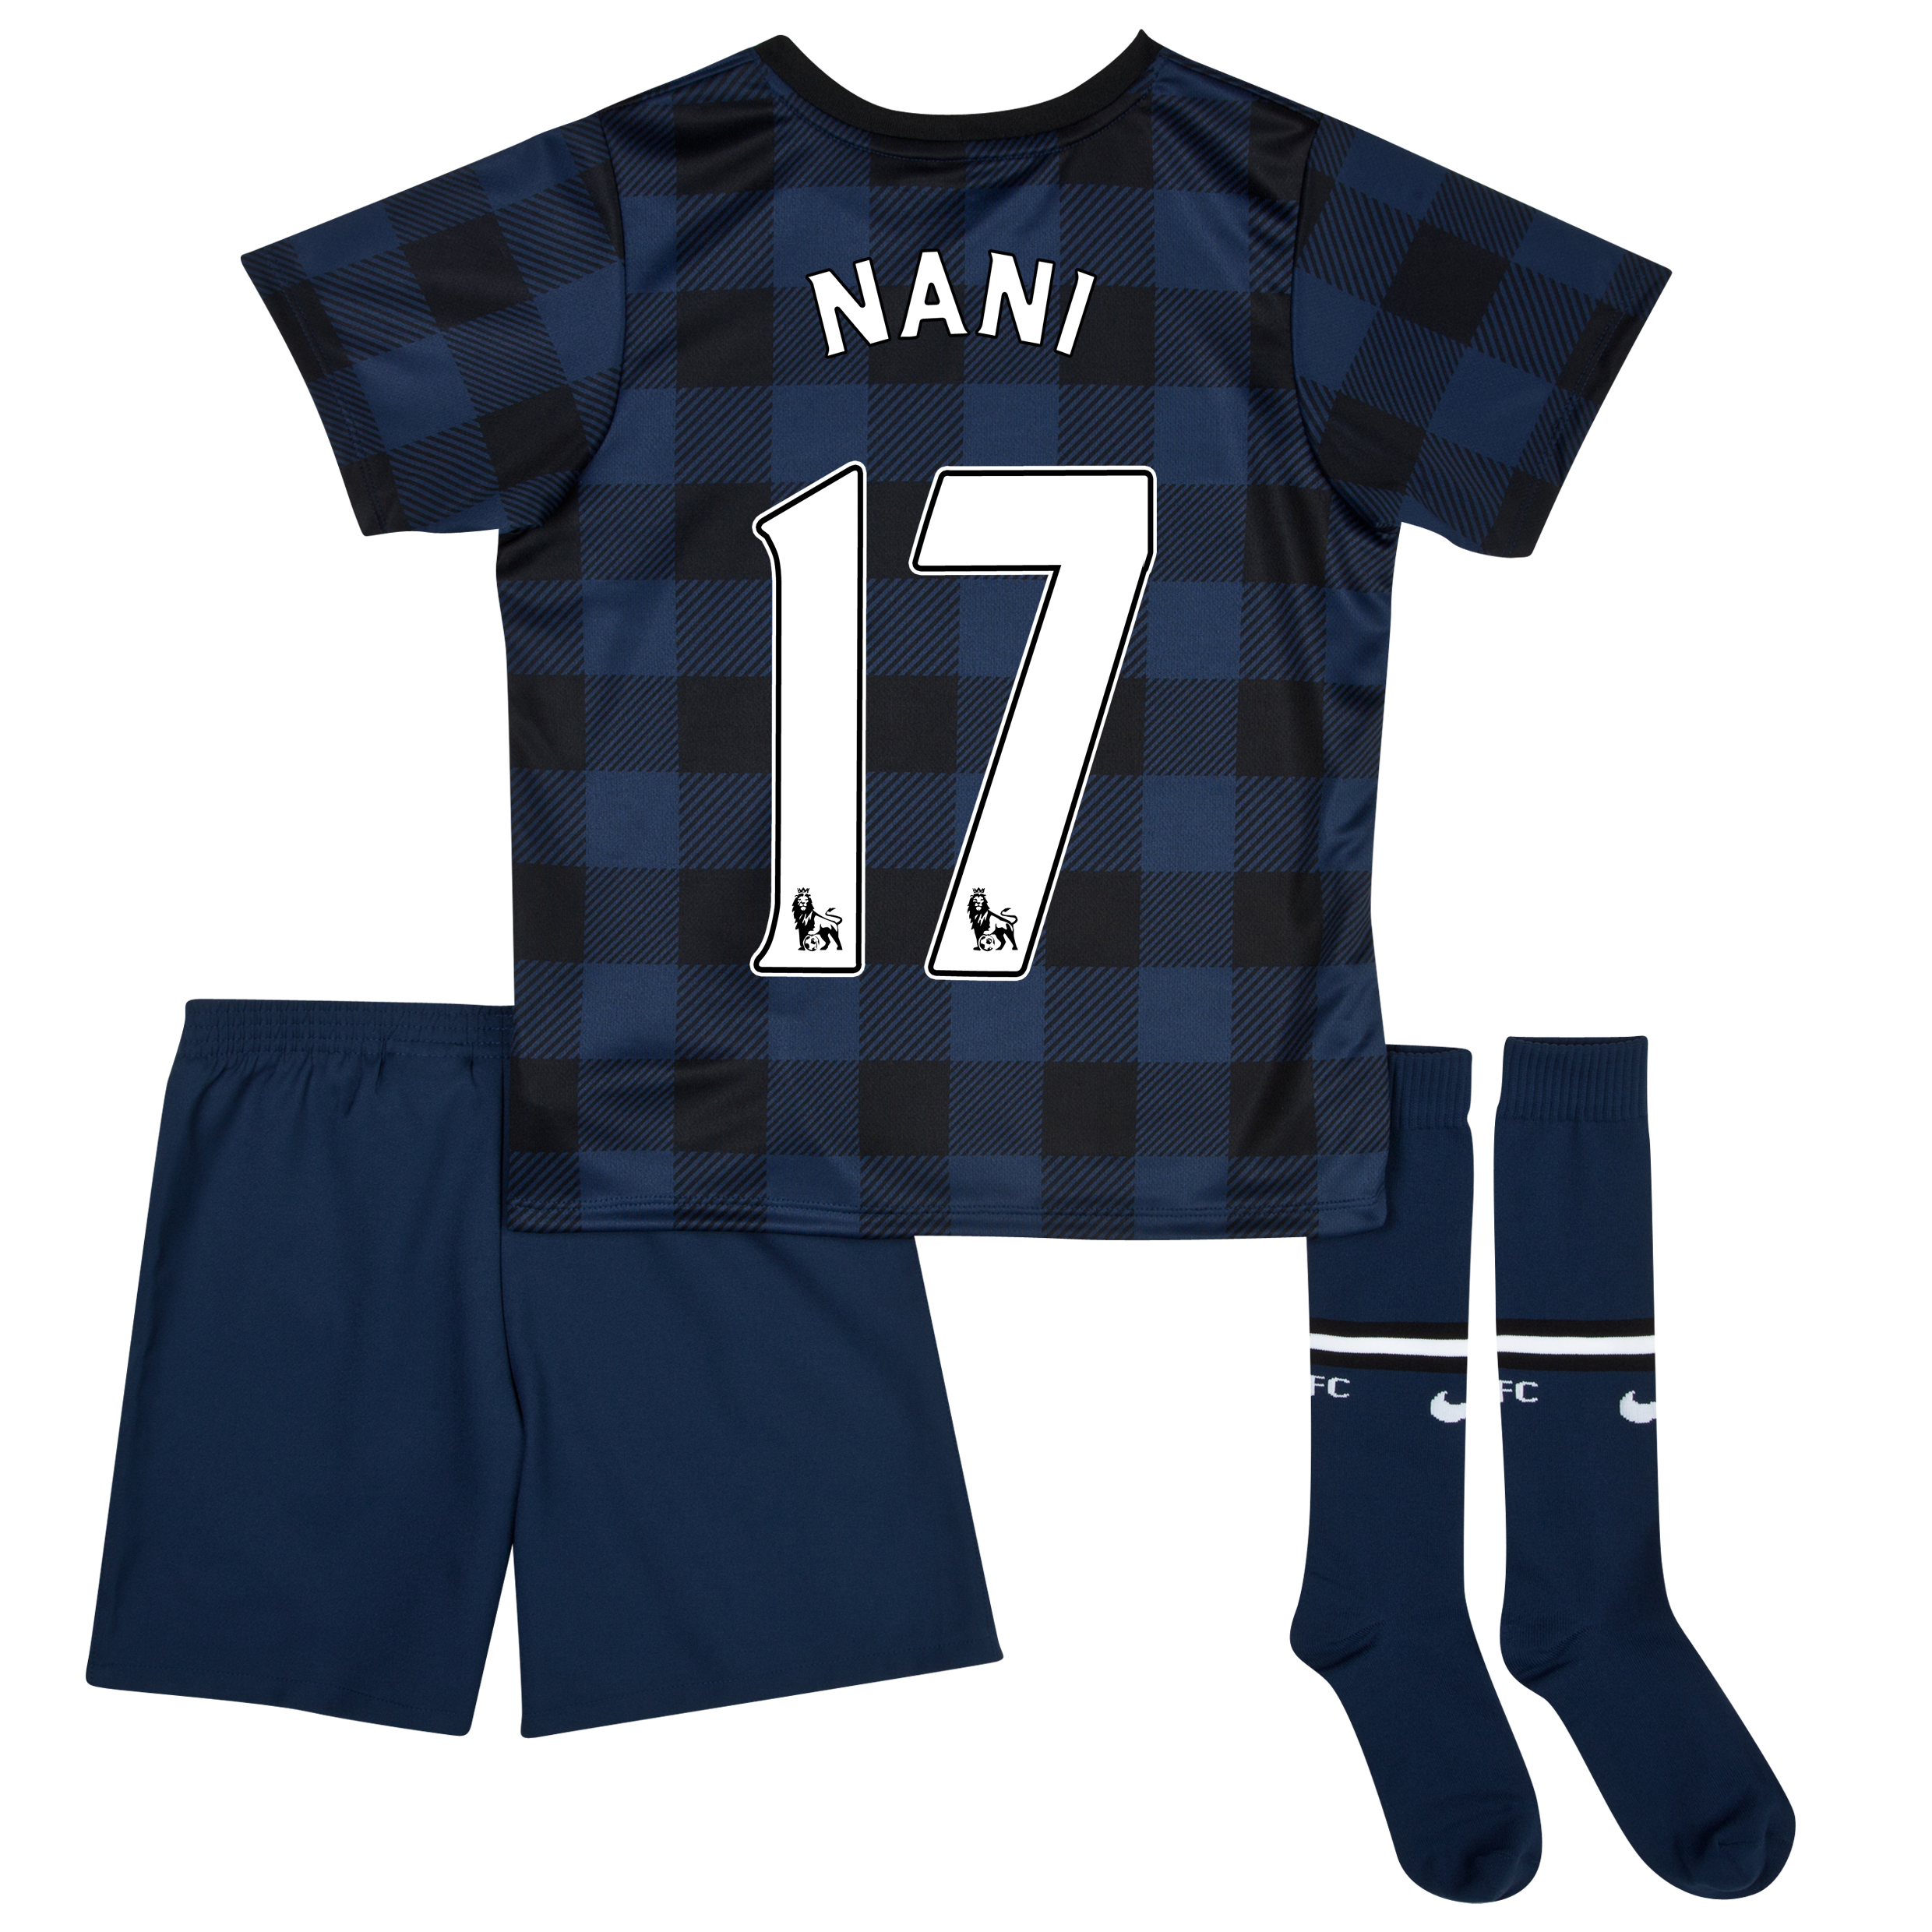 Manchester United Away Kit 2013/14 - Little Boys with Nani 17 printing